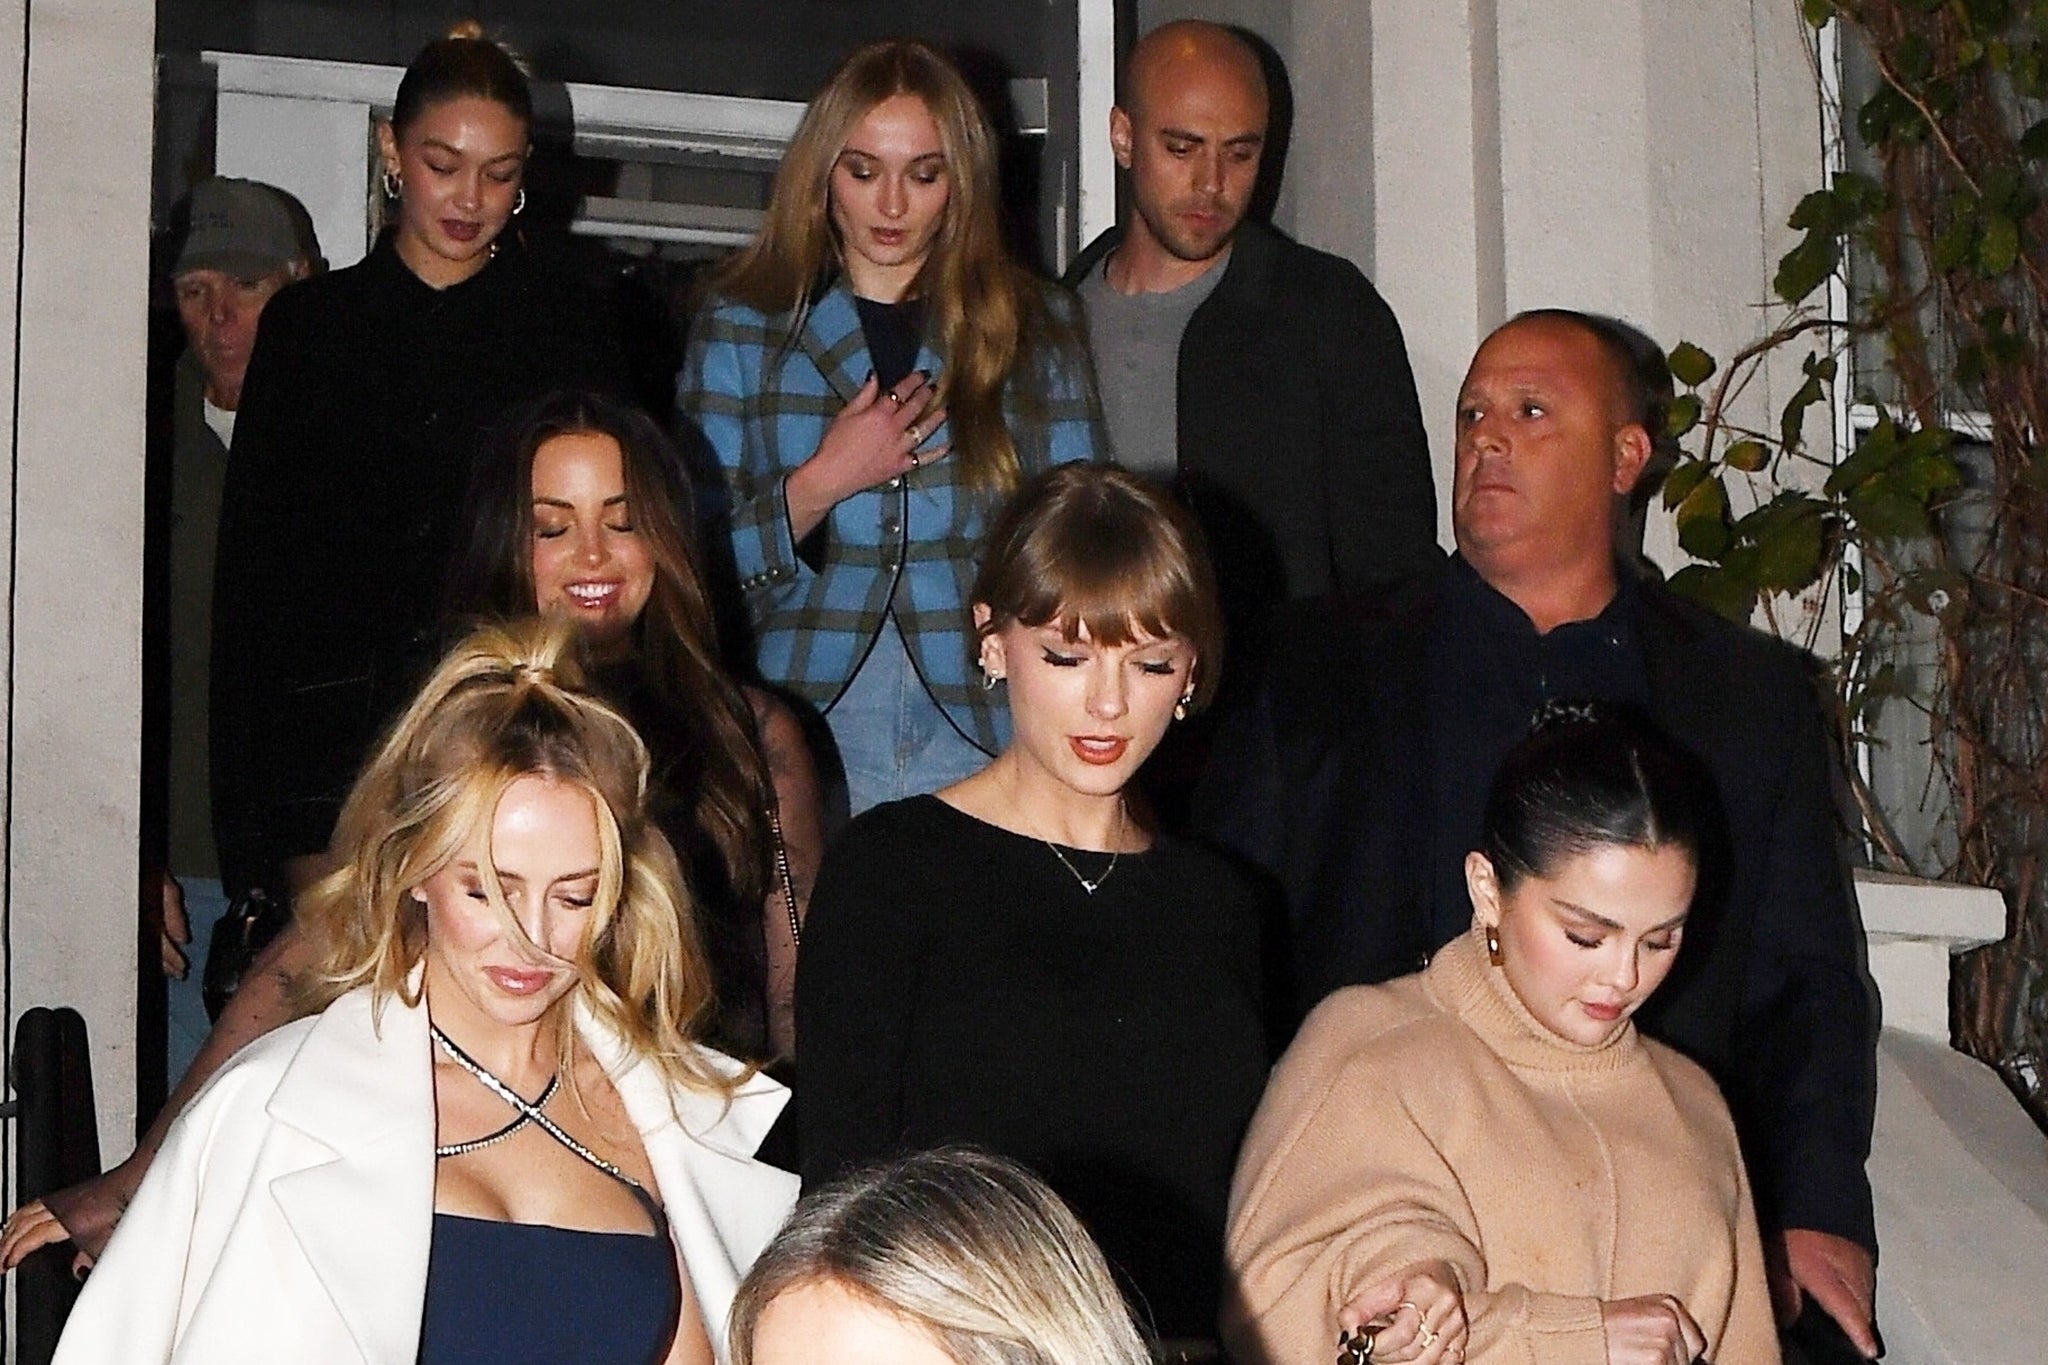 Swift exit: Taylor Swift leaves a New York restaurant with friends including Selena Gomez, Gigi Hadid and Sophie Turner